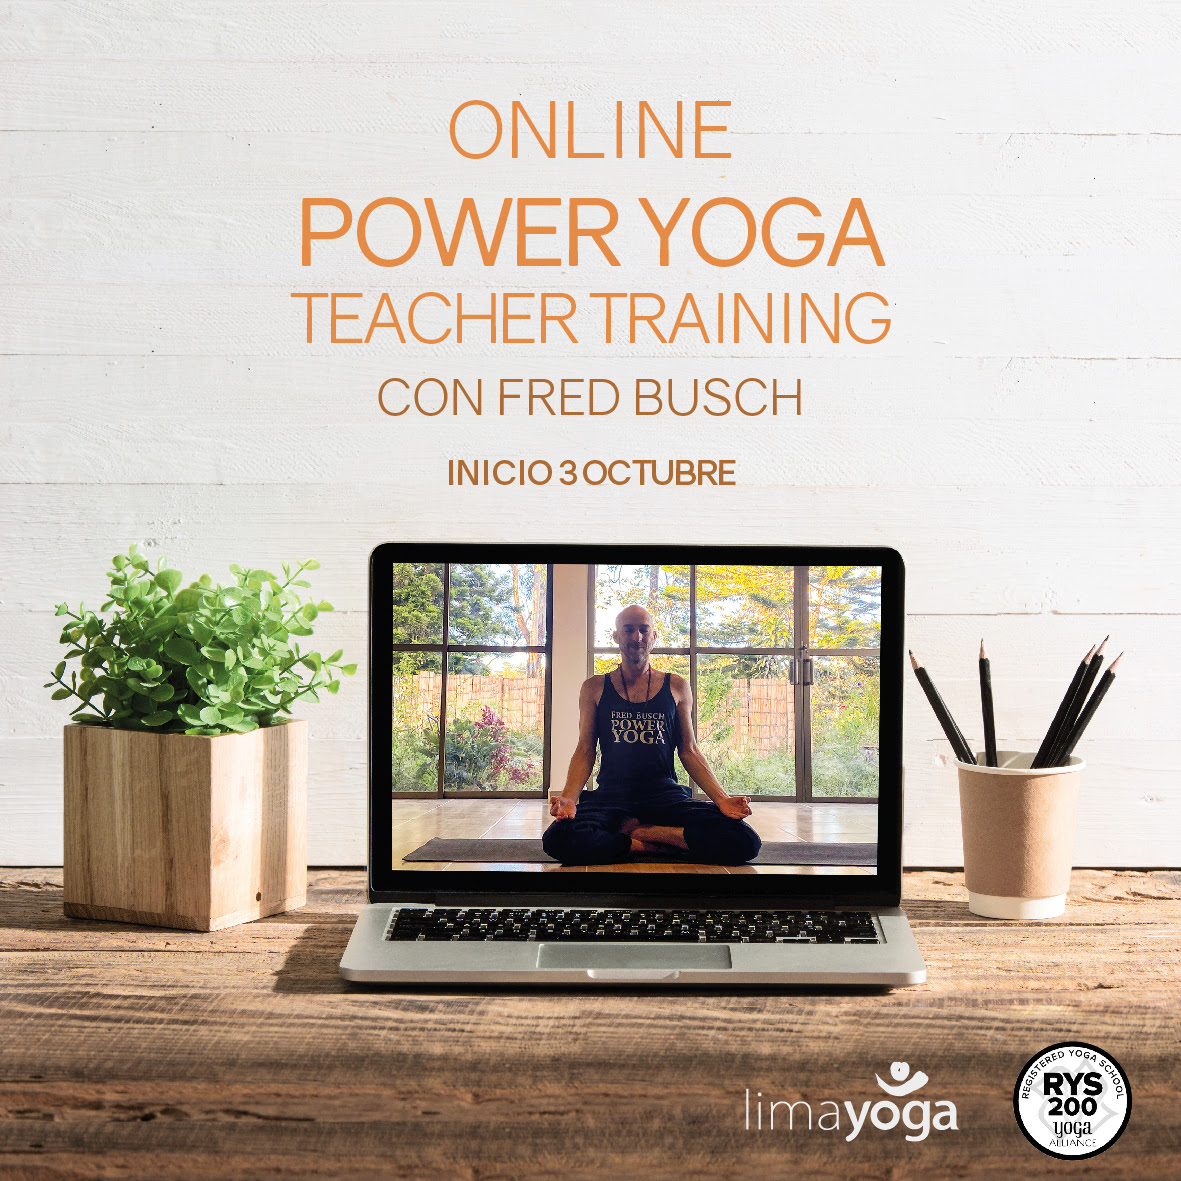 Online Yoga Teacher Training Classes  International Society of Precision  Agriculture